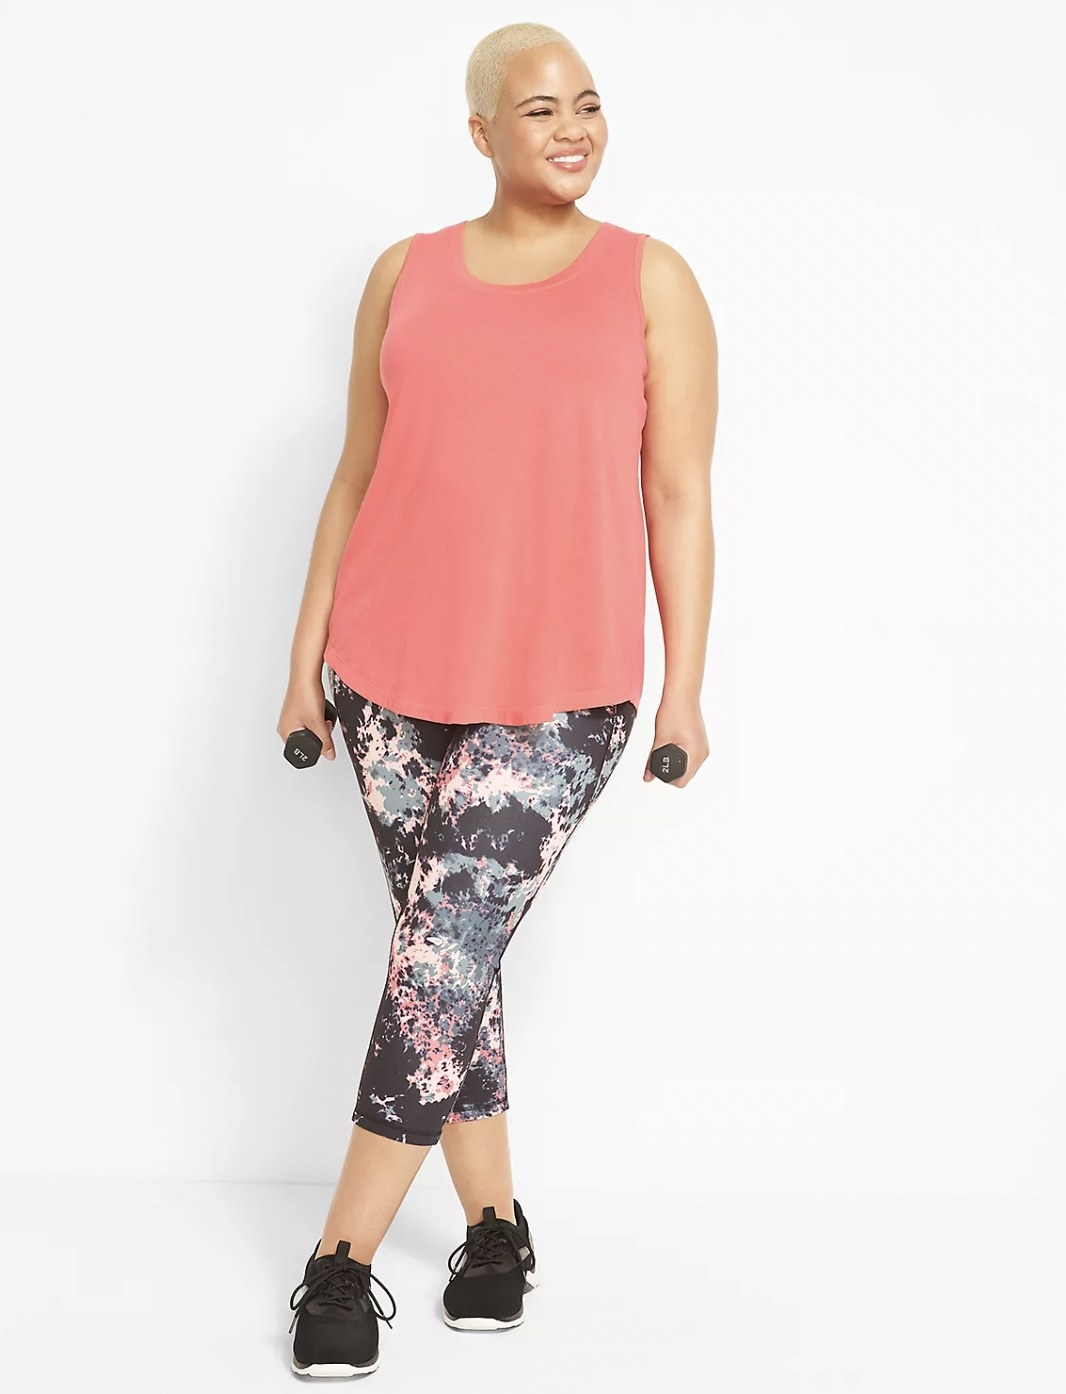 Model in the capri leggings with pink workout tank and holding small dumbbells in each hand